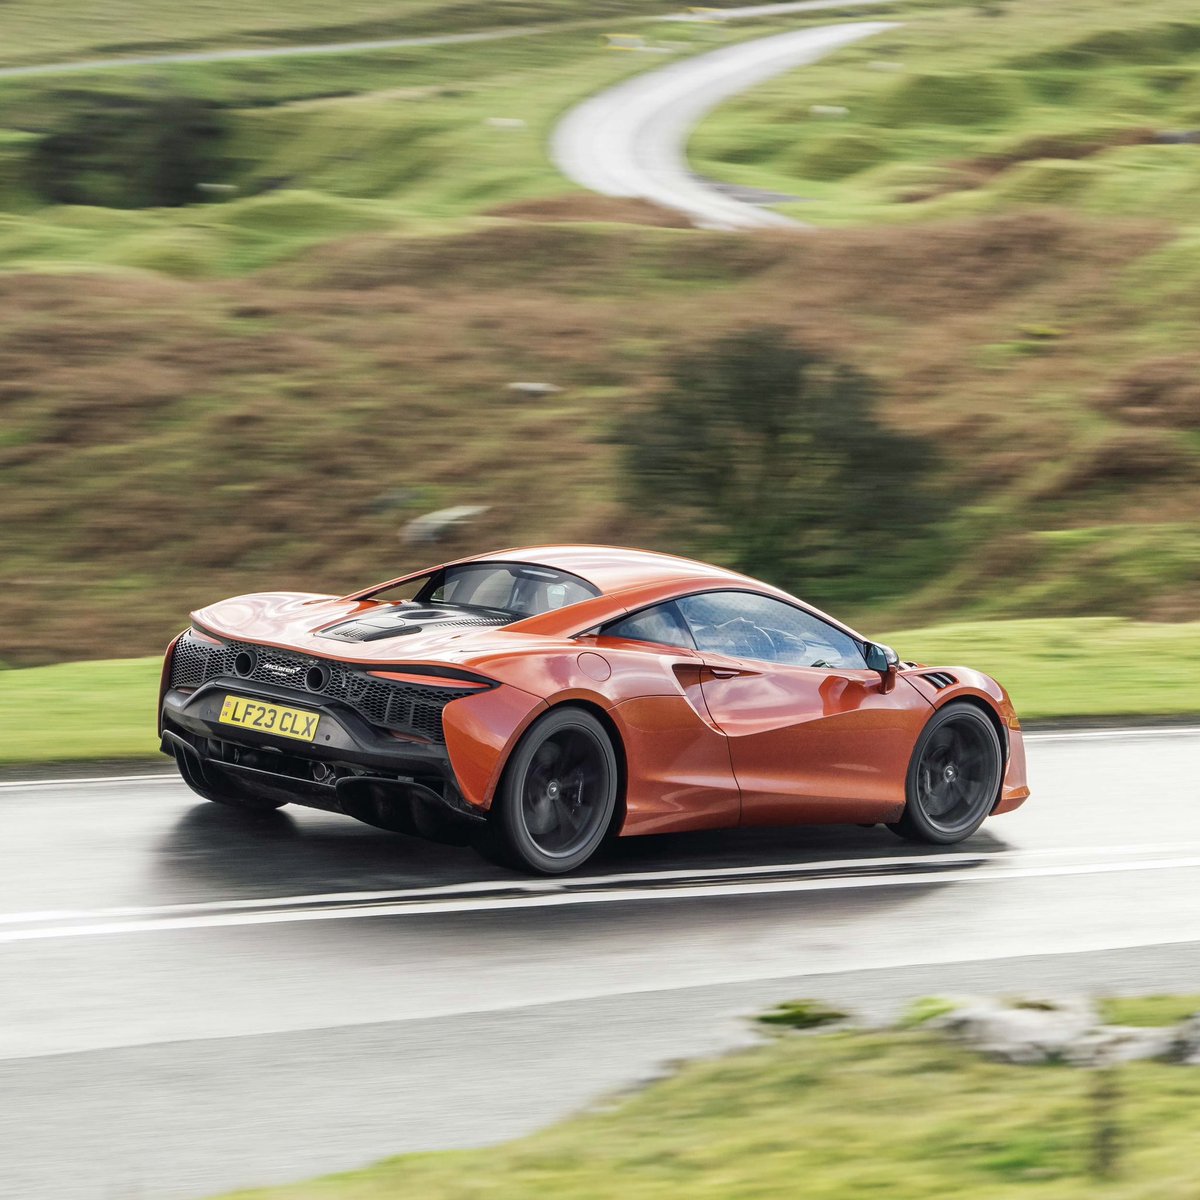 ‘On summer rubber and finally dry roads, the car feels like it has another hundred horsepower.’ Read @Andrew_Frankel's third update on his long-term McLaren Artura. Start your 30-day free trial to enjoy full access to The Intercooler app and website: the-intercooler.com/library/featur…